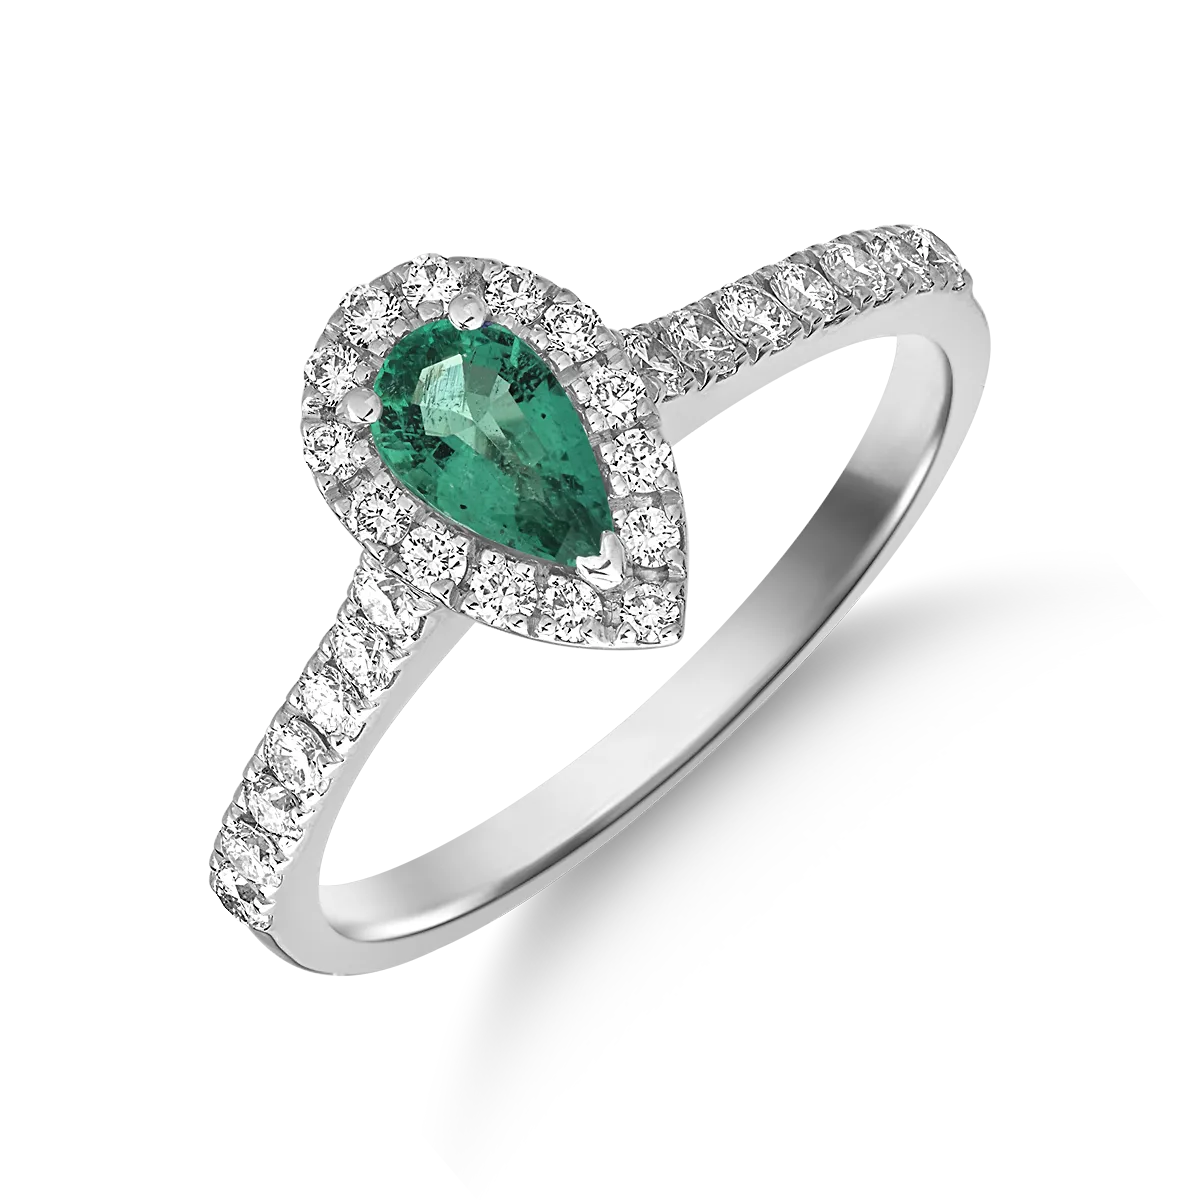 18K white gold ring with 0.4ct emerald and 0.38ct diamonds